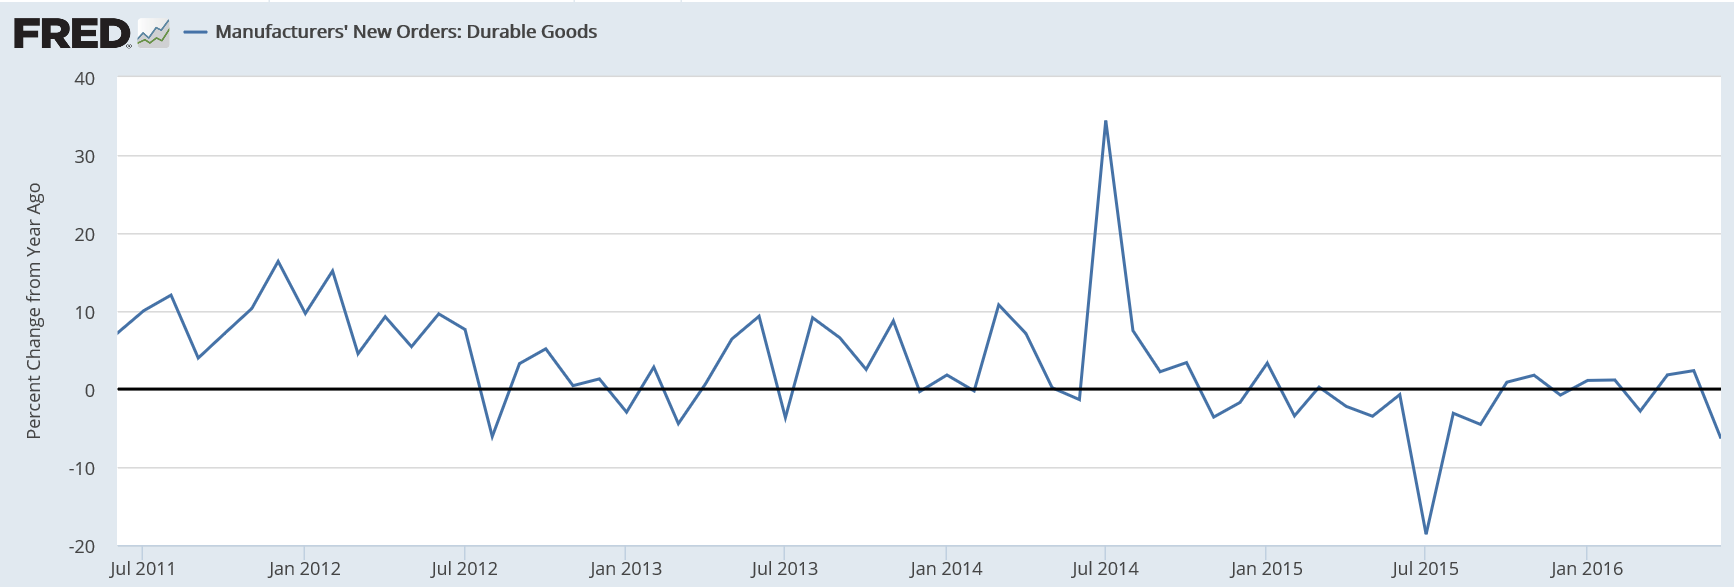 Real final domestic demand, Layoffs, Fed tax receipts, Factory orders